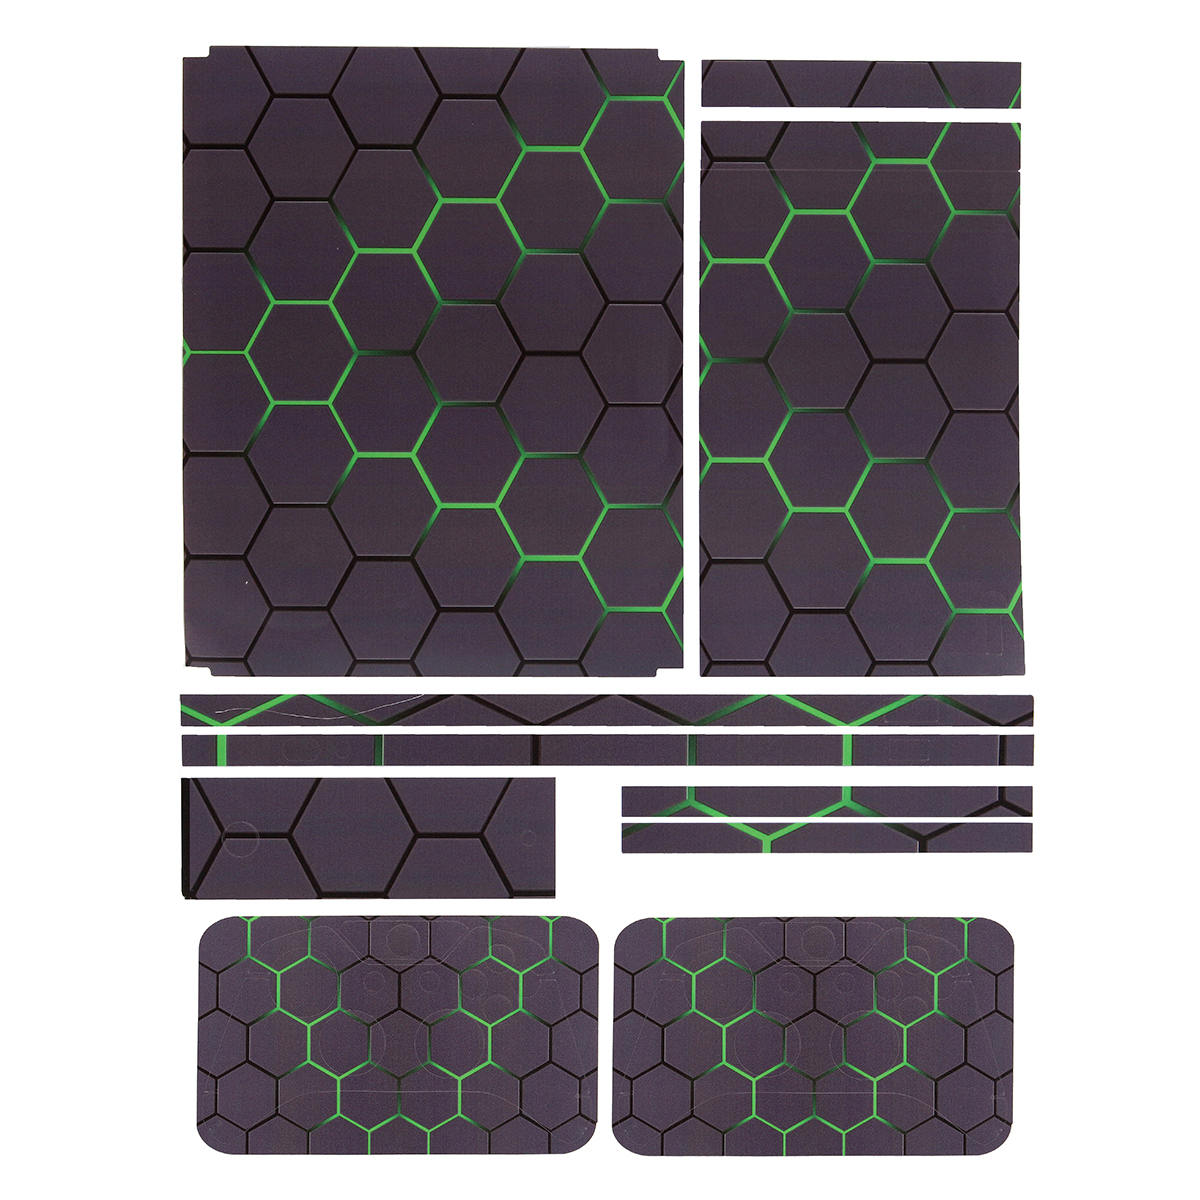 Green Grid Vinyl Decal Skin Stickers Cover for Xbox One S Game Console&2 Controllers 37